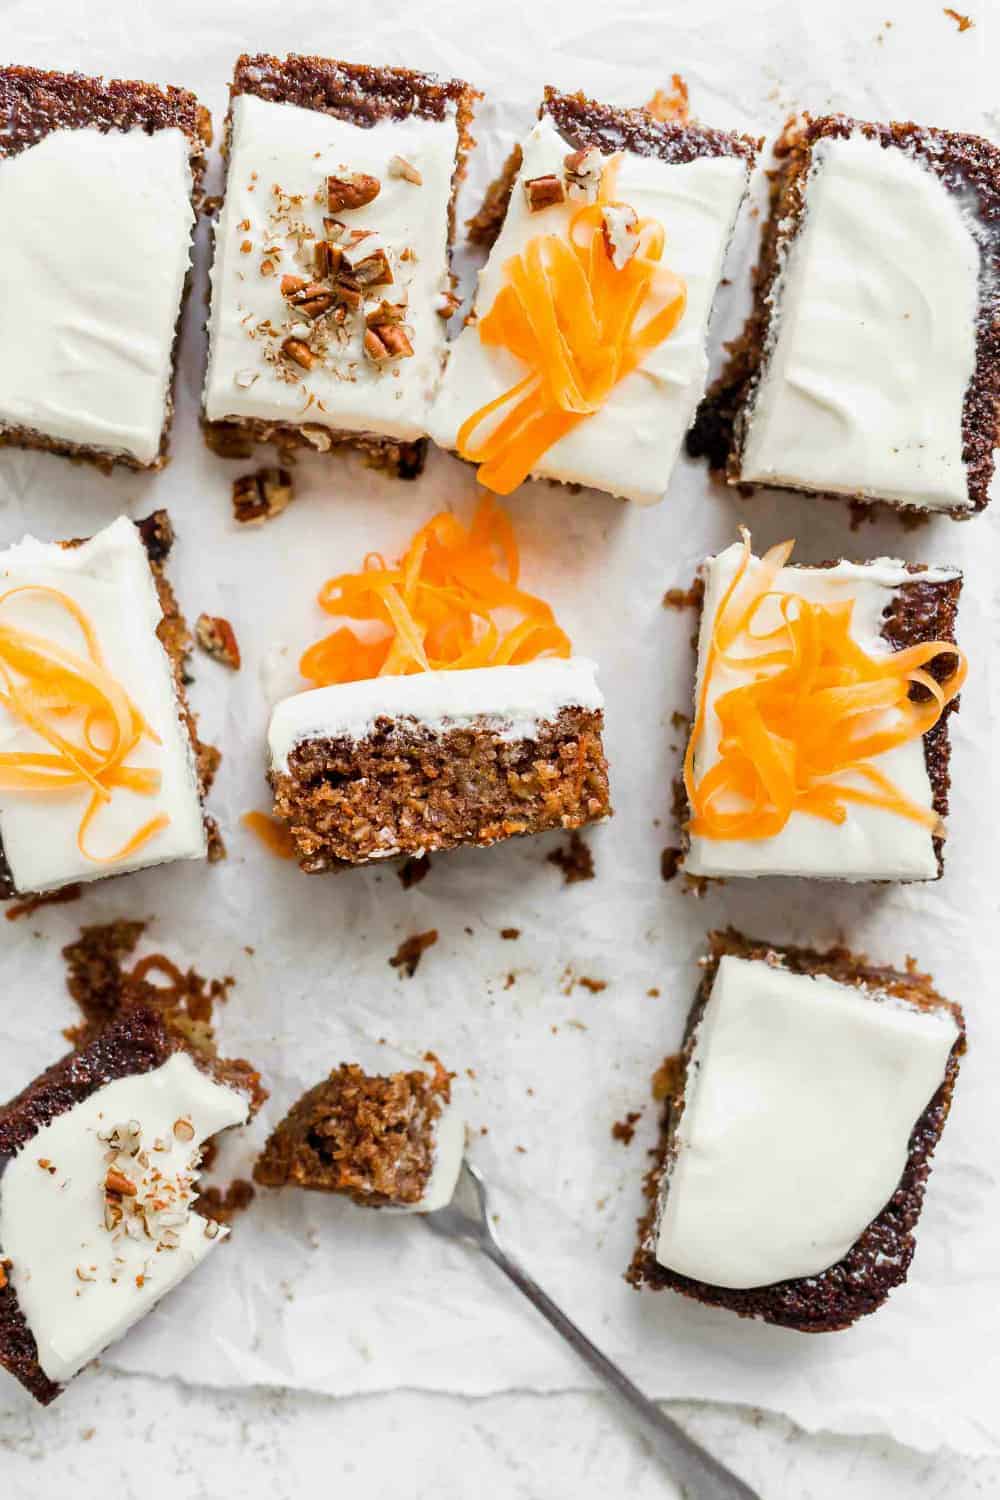 This copycat version of J. Alexander’s Carrot Cake is every bit as perfect as the original: full of carrots, pineapple and coconut, and soaked with a buttermilk syrup for a melt-in-your-mouth slice of cake.